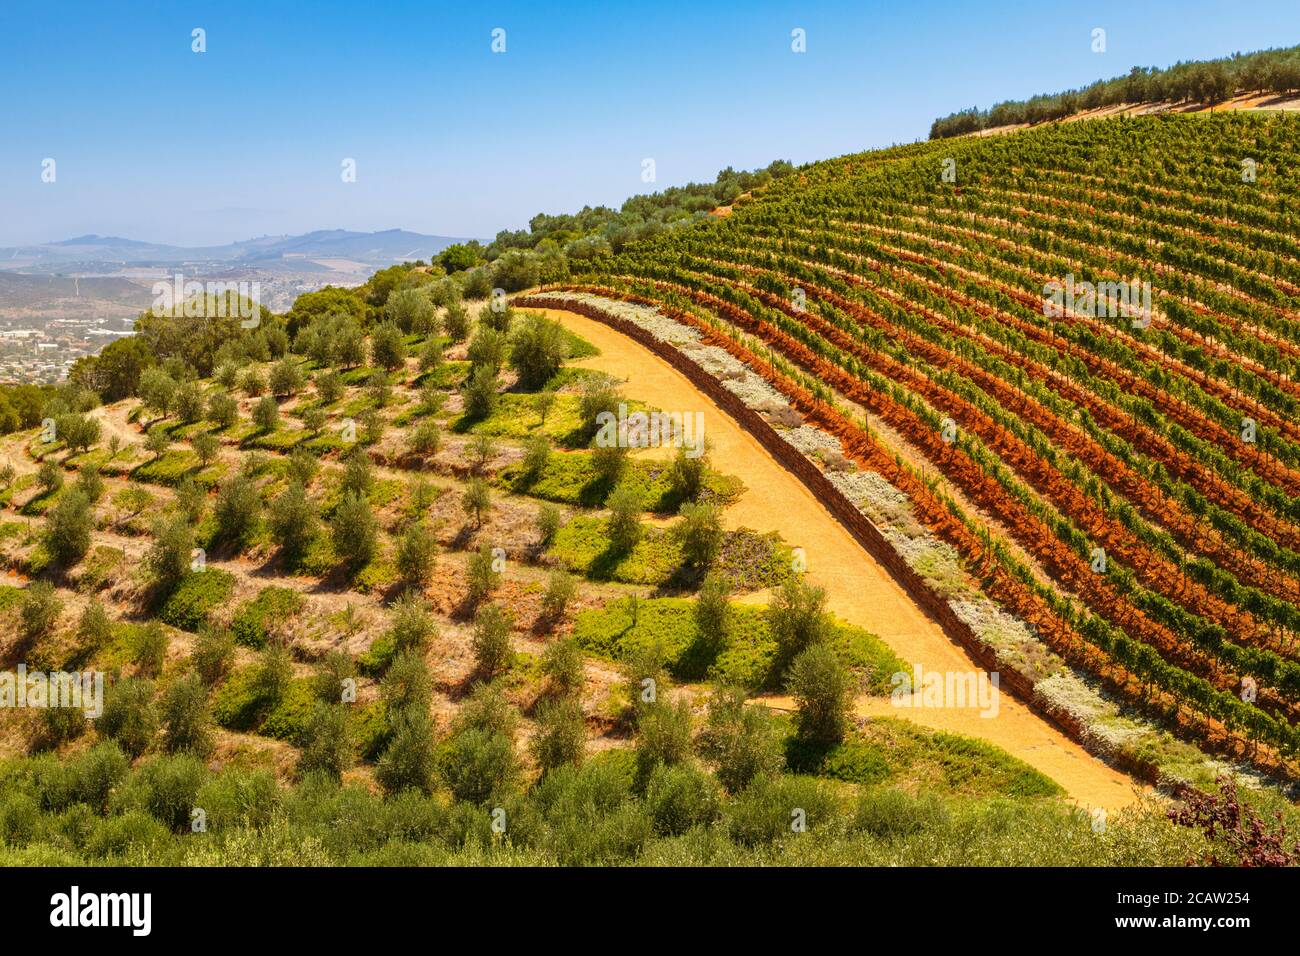 Tokara vinyard with vines and Lavendel in foreground, Stellenbosch, South Africa Stock Photo